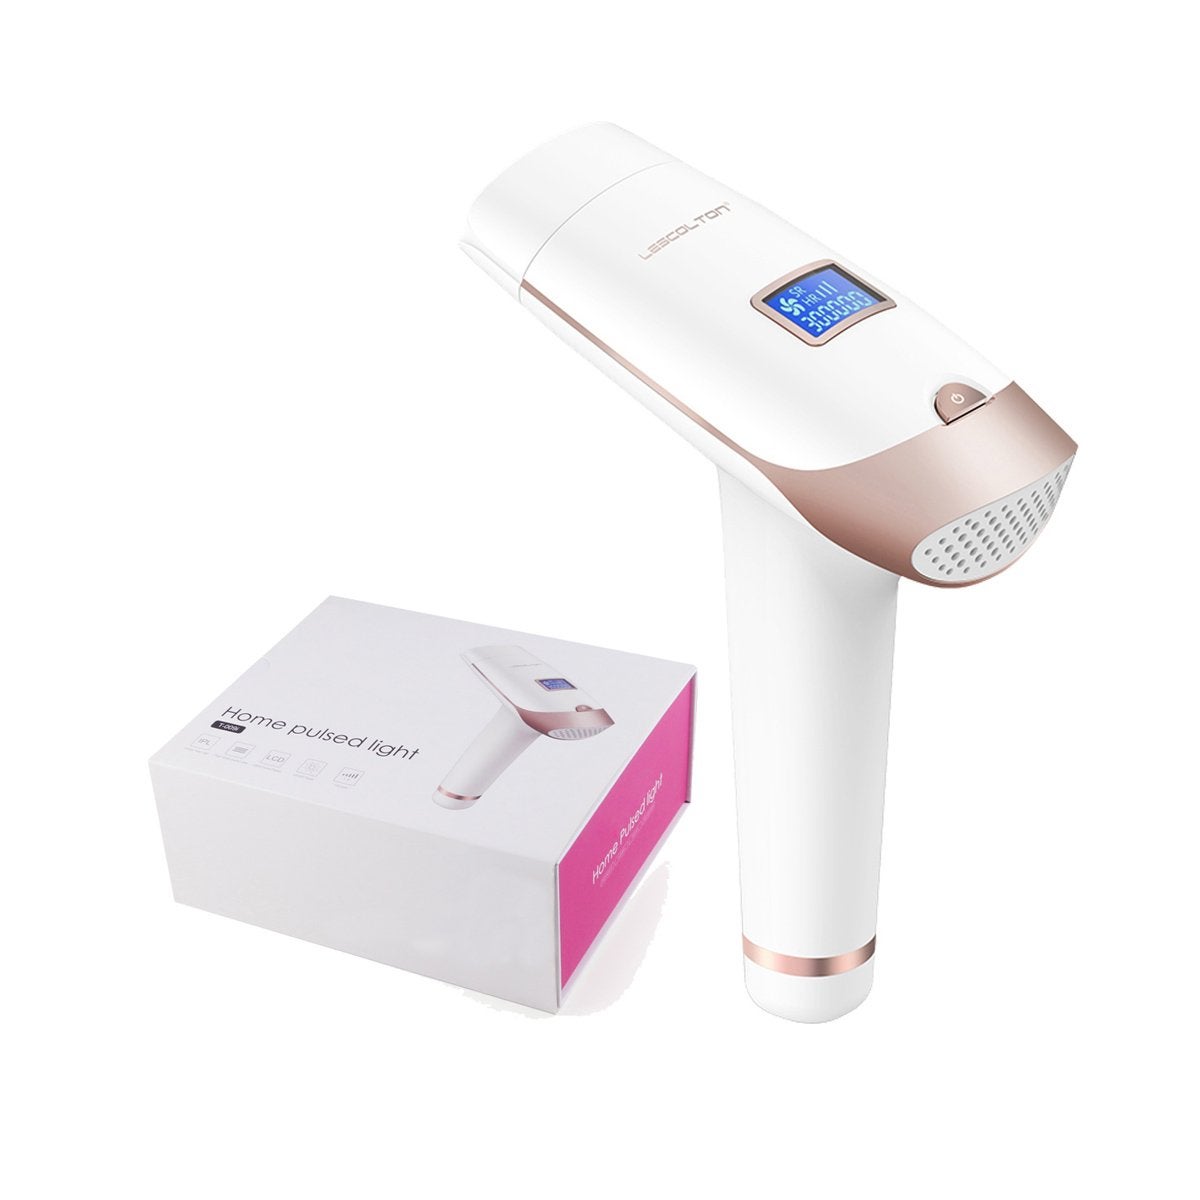 Lescolton Permanent IPL Hair Removal 300,000 Pulses with LCD Display